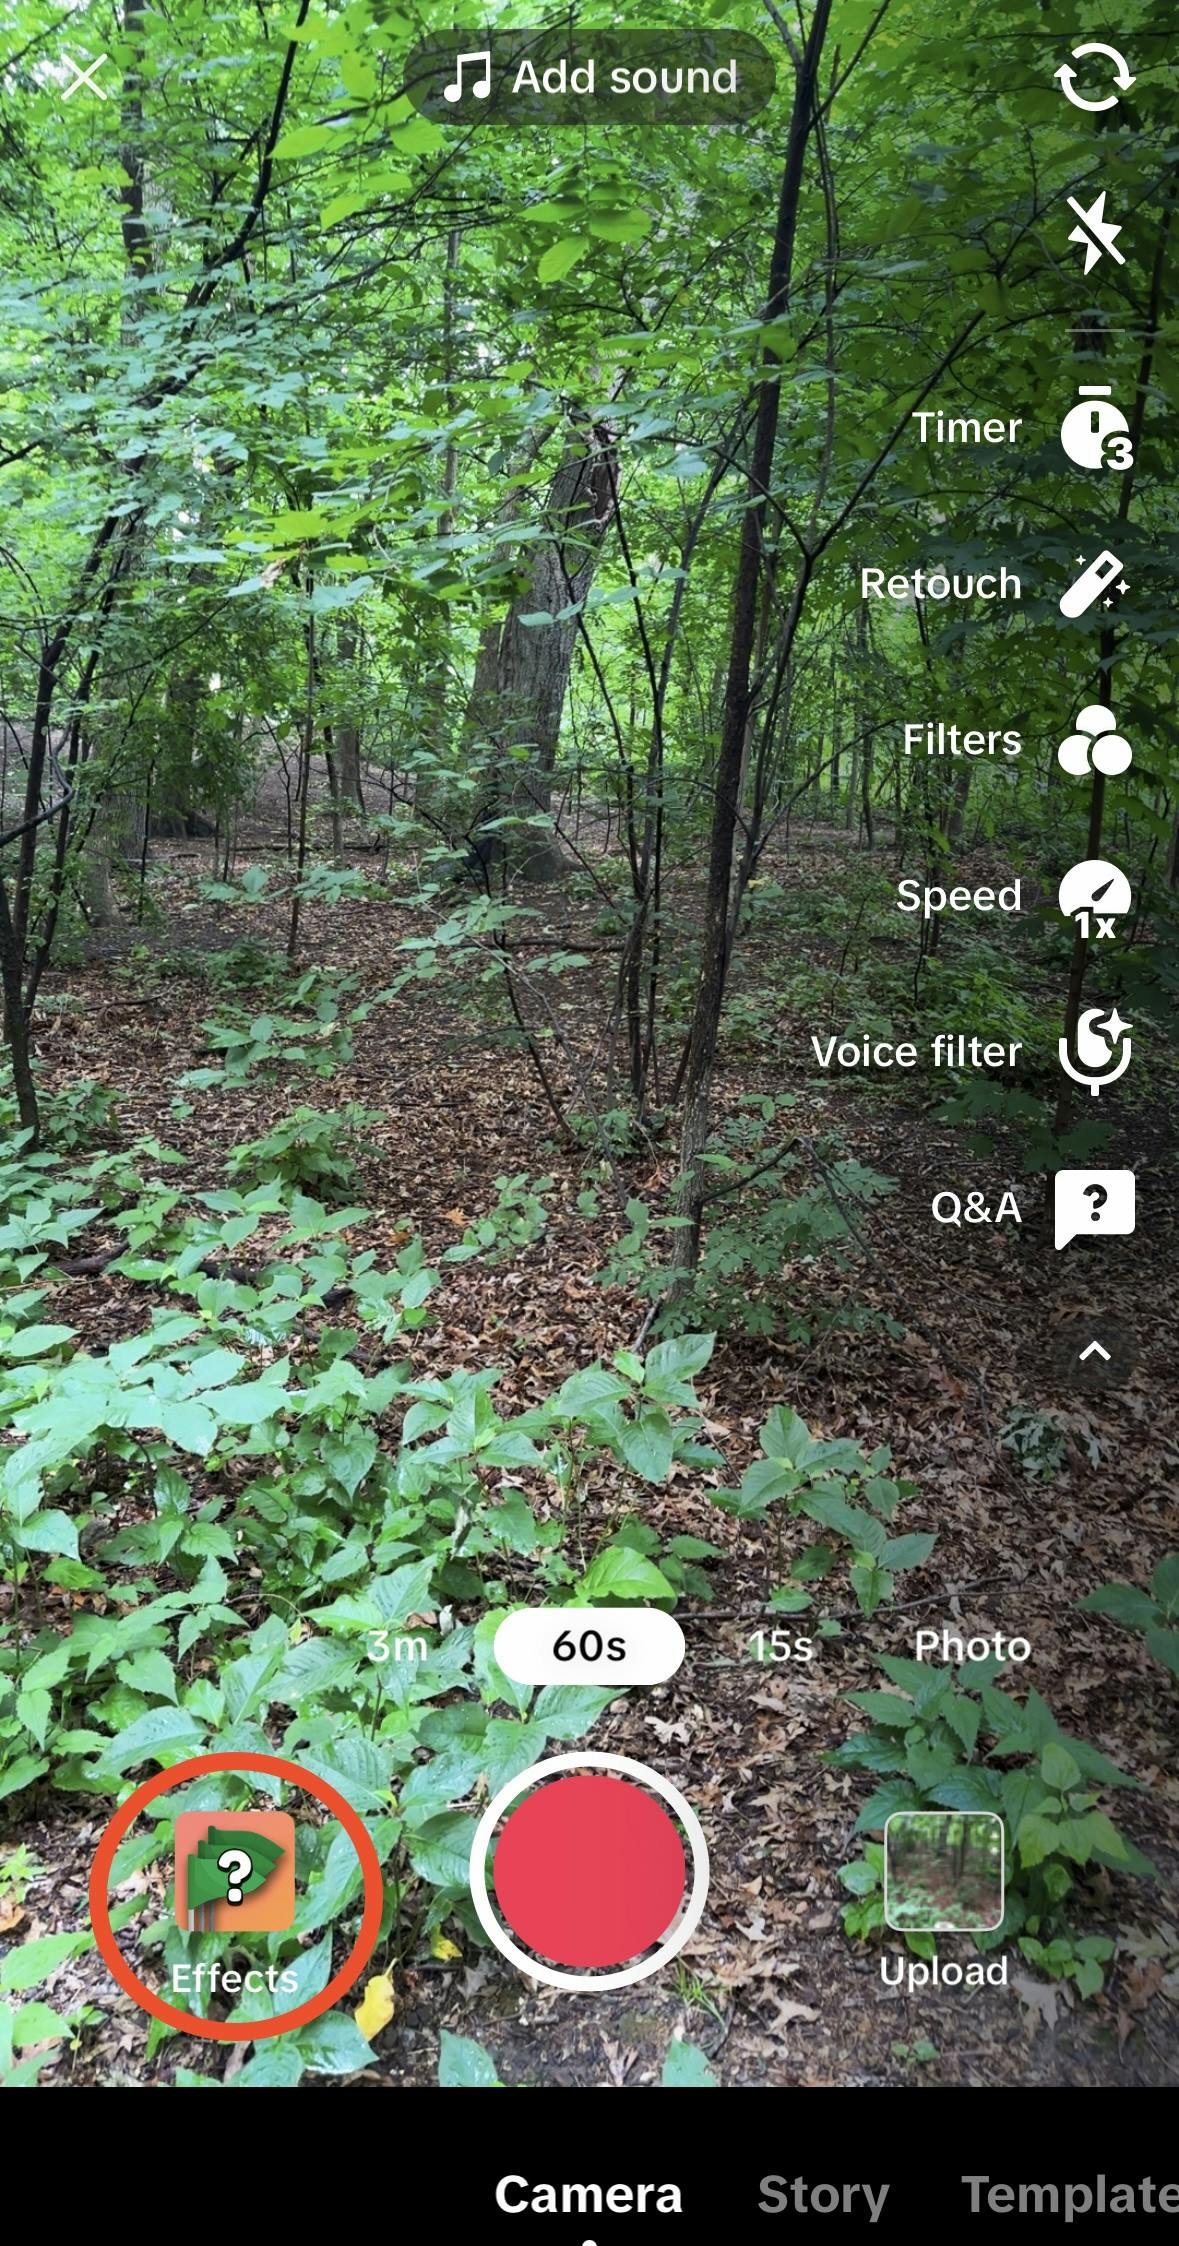 A screenshot of the window to start recording a TikTok, this one of a forest landscape. A square-shaped icon labeled “Effects” is to the left of the record button, with a red circle to draw attention to it.